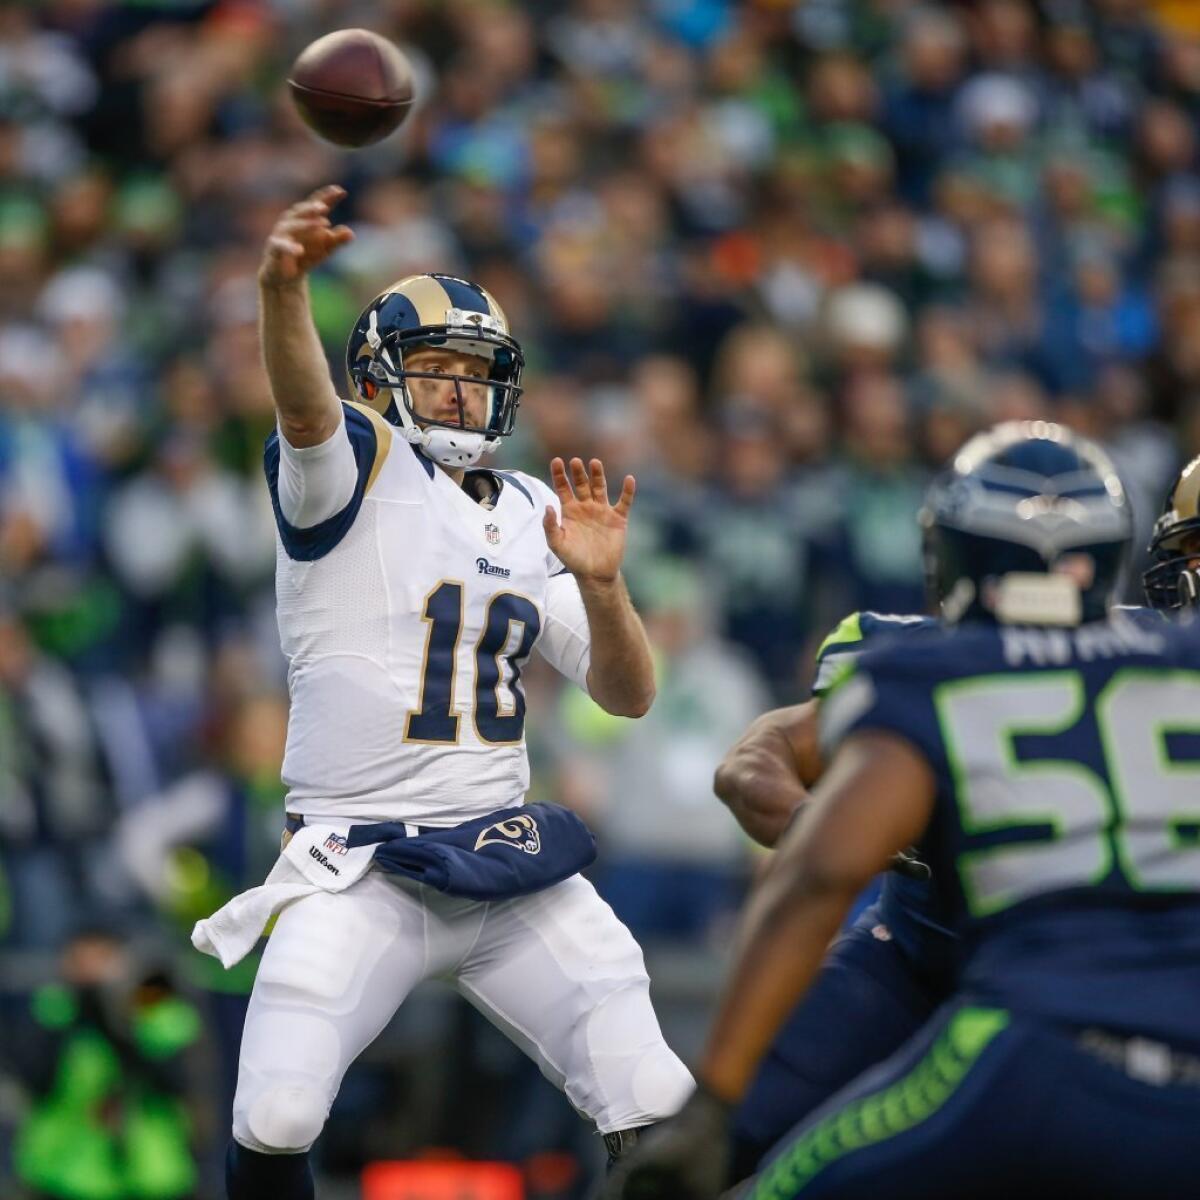 St. Louis Rams' backup quarterback got crushed by the Seahawks last season. Next year in L.A.?